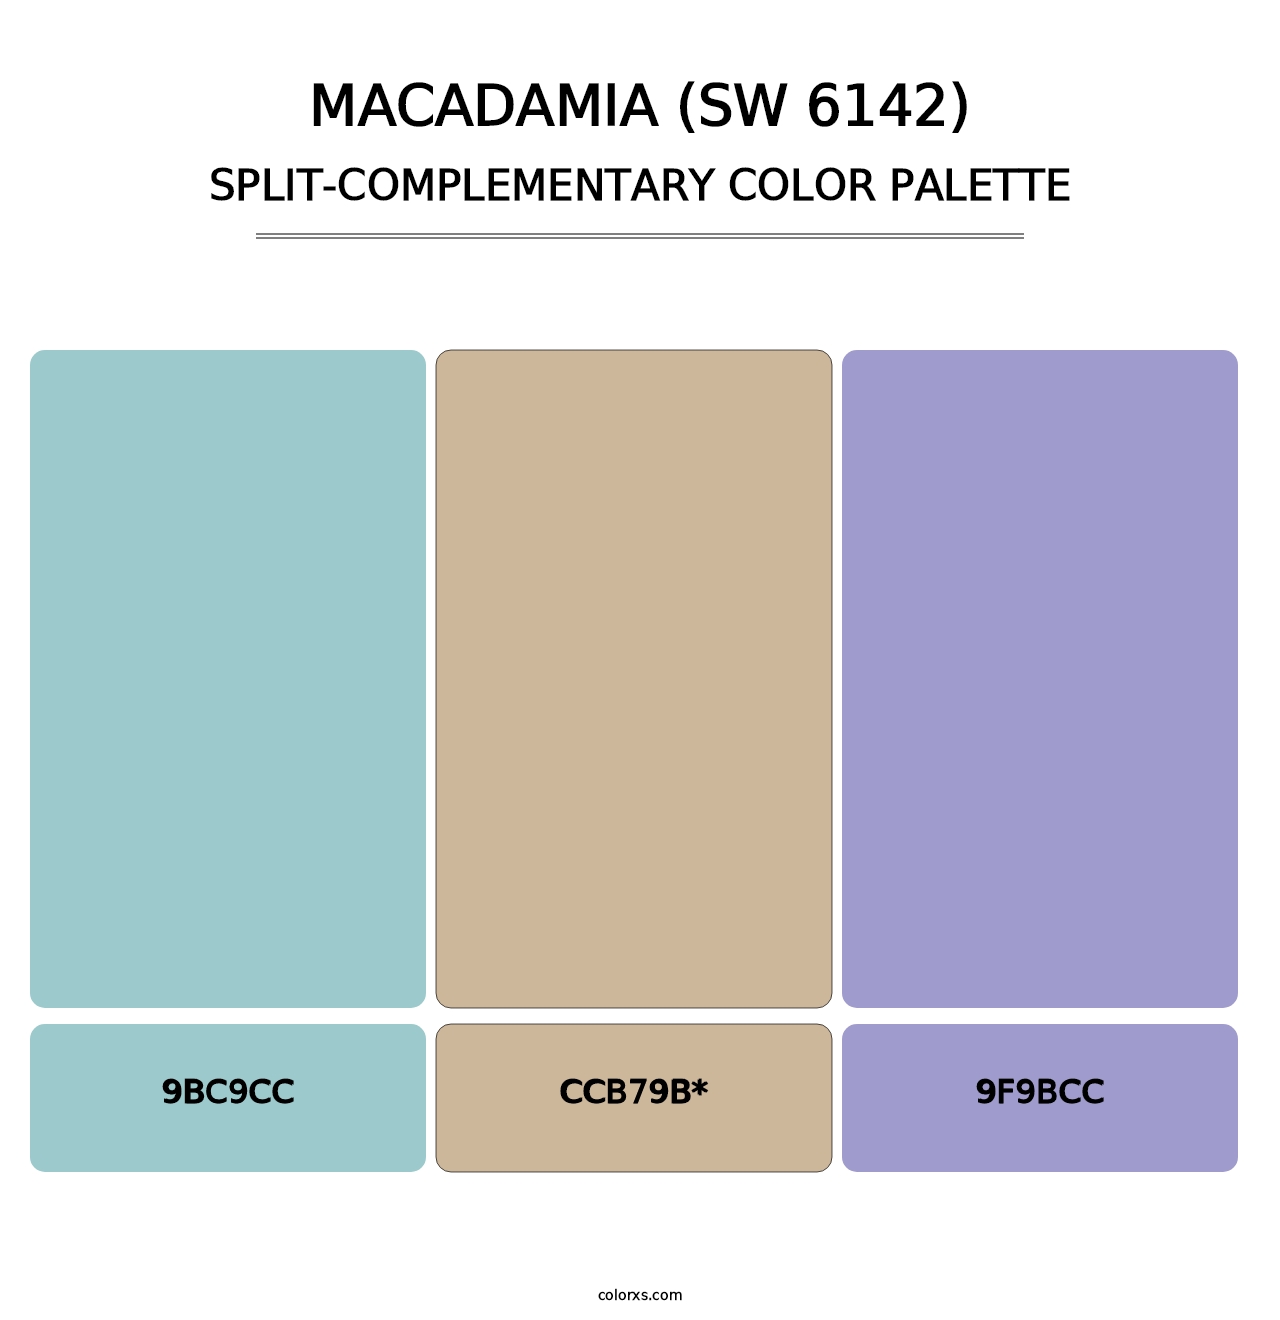 Macadamia (SW 6142) - Split-Complementary Color Palette